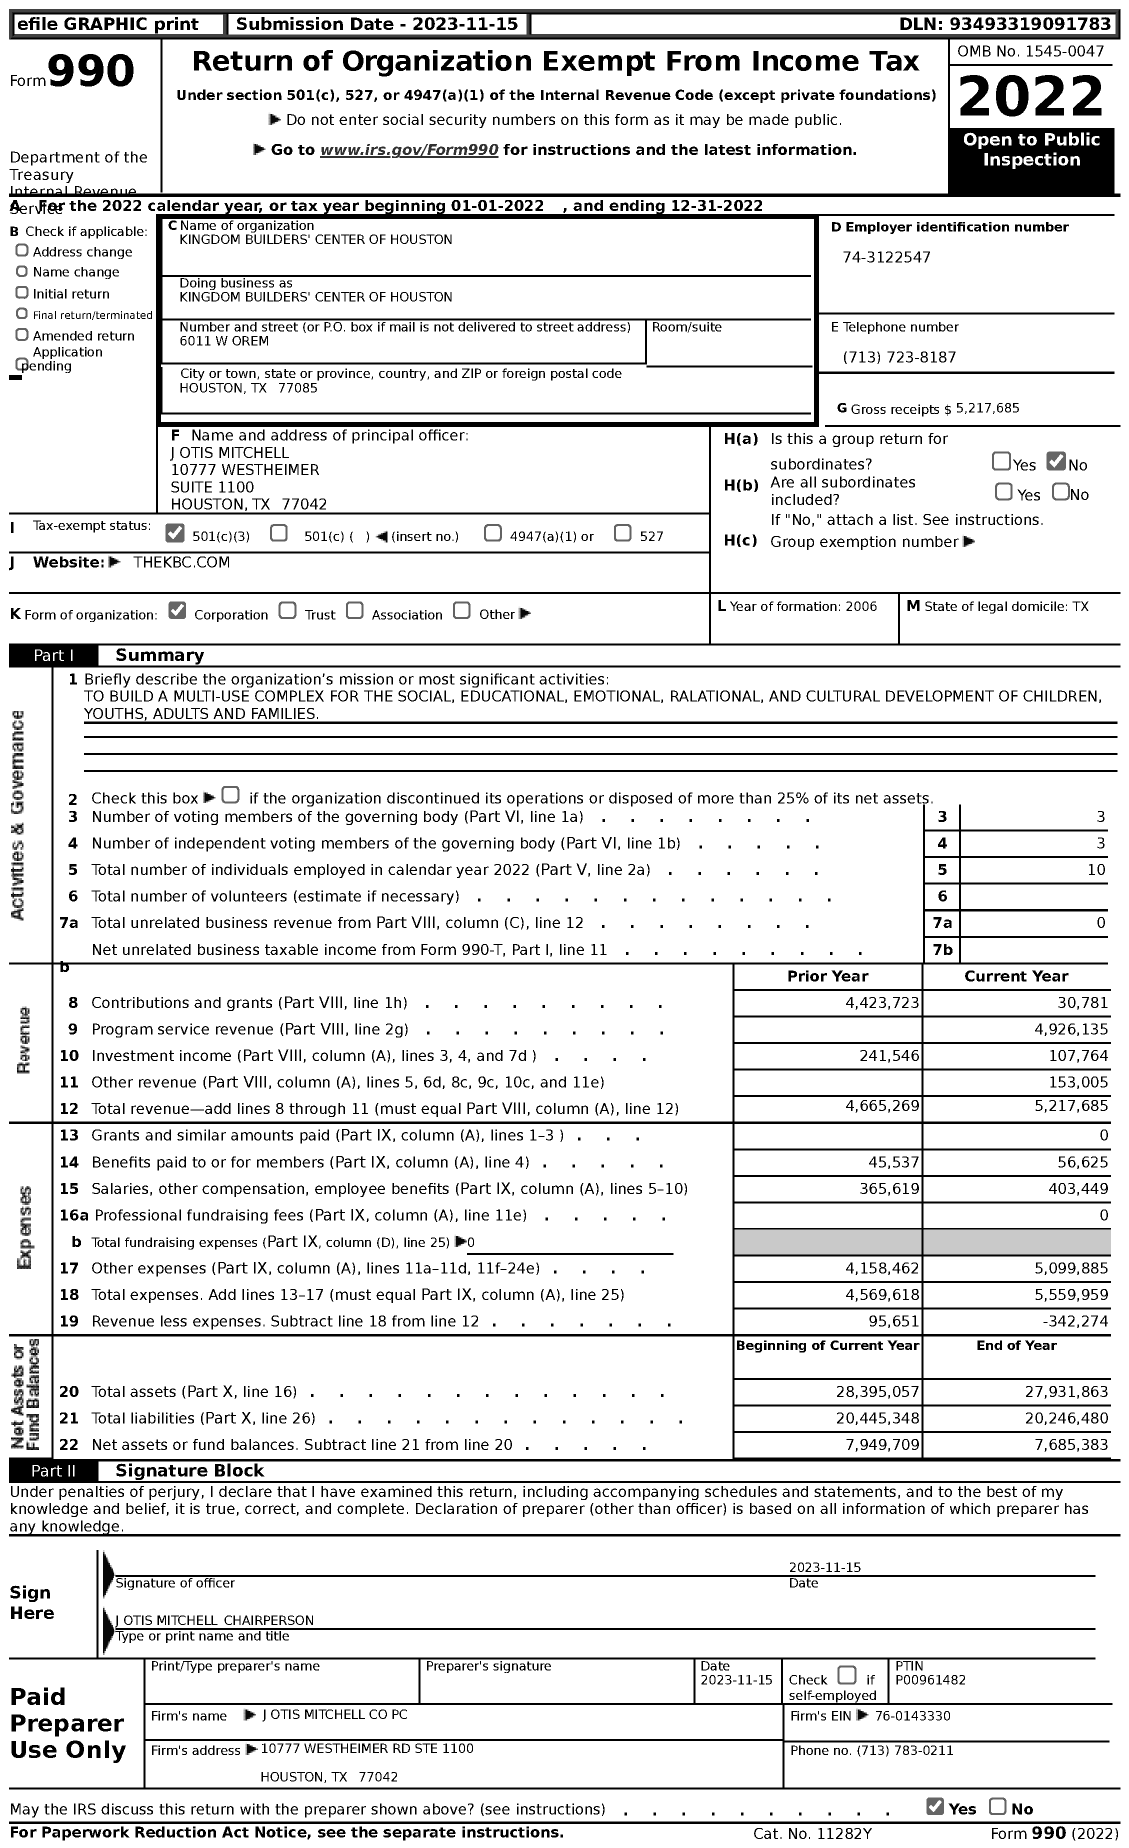 Image of first page of 2022 Form 990 for Kingdom Builders Center of Houston (KBC)